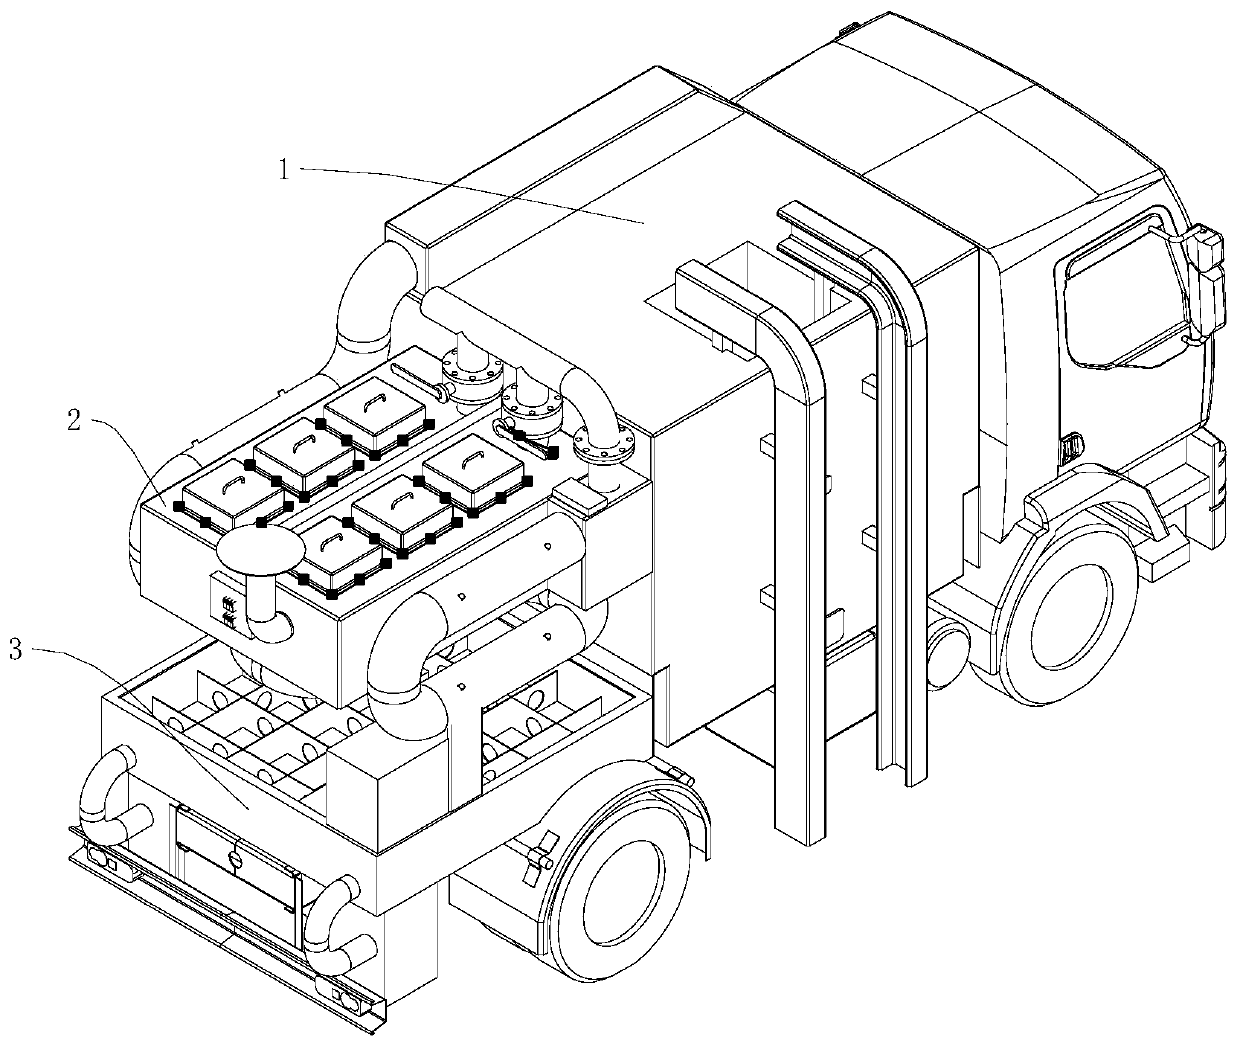 Vehicle-mounted movable waste incineration system